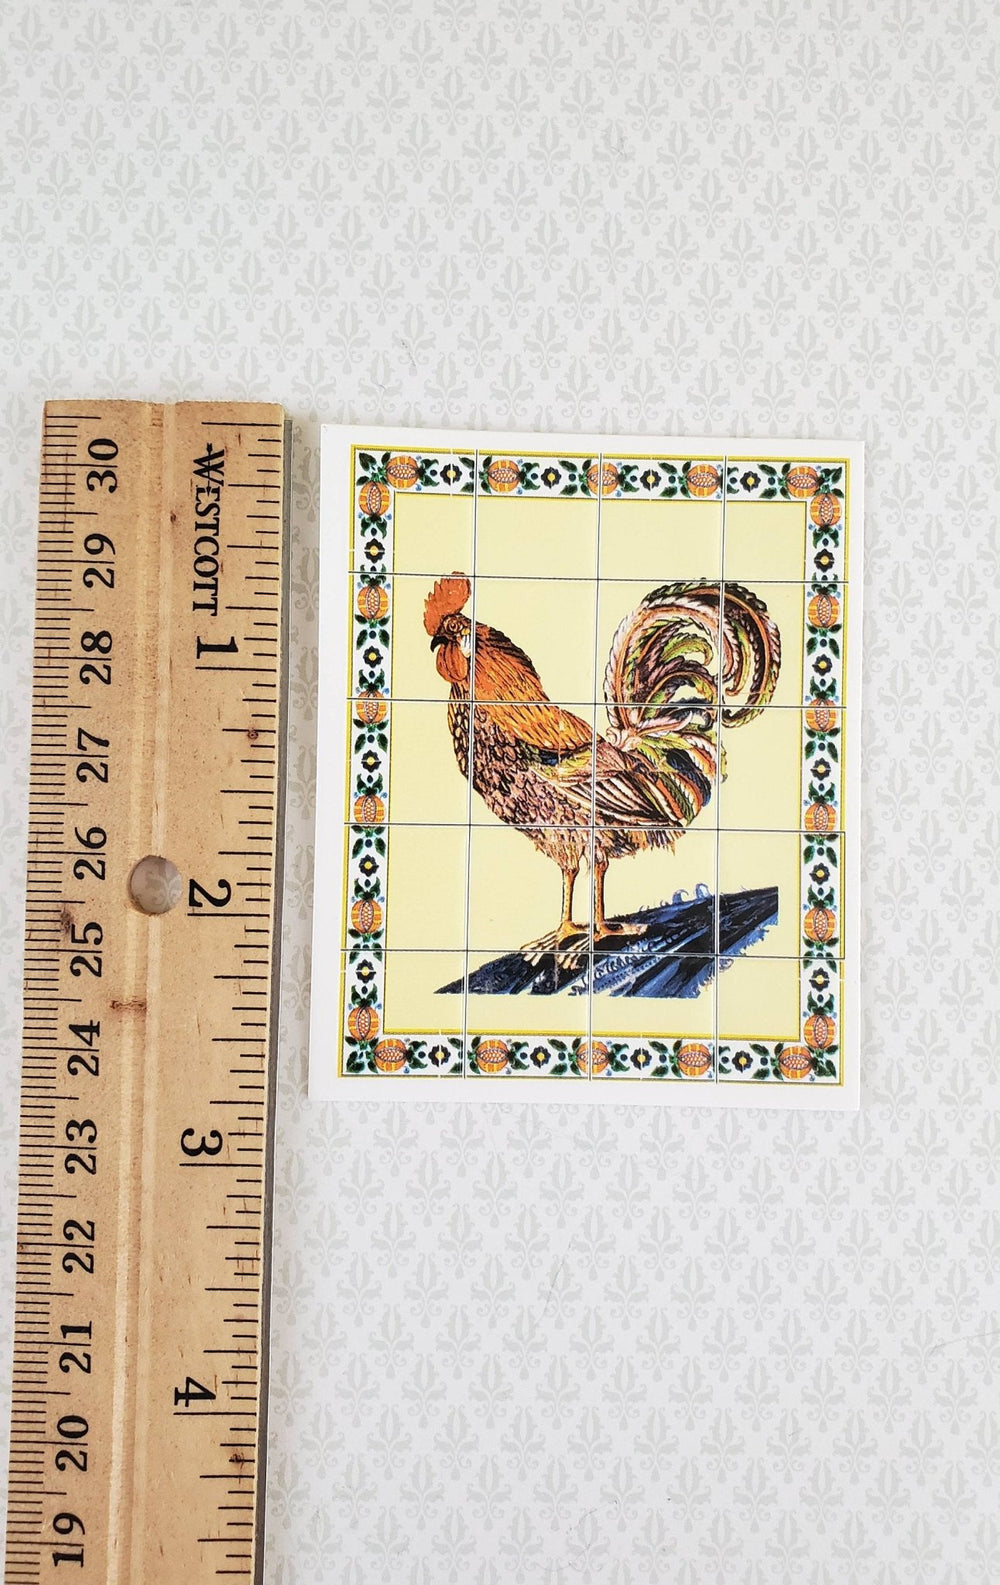 Dollhouse Miniature Wall "Tiles" Embossed Paper Kitchen Rooster 1:12 Scale by World Model - Miniature Crush